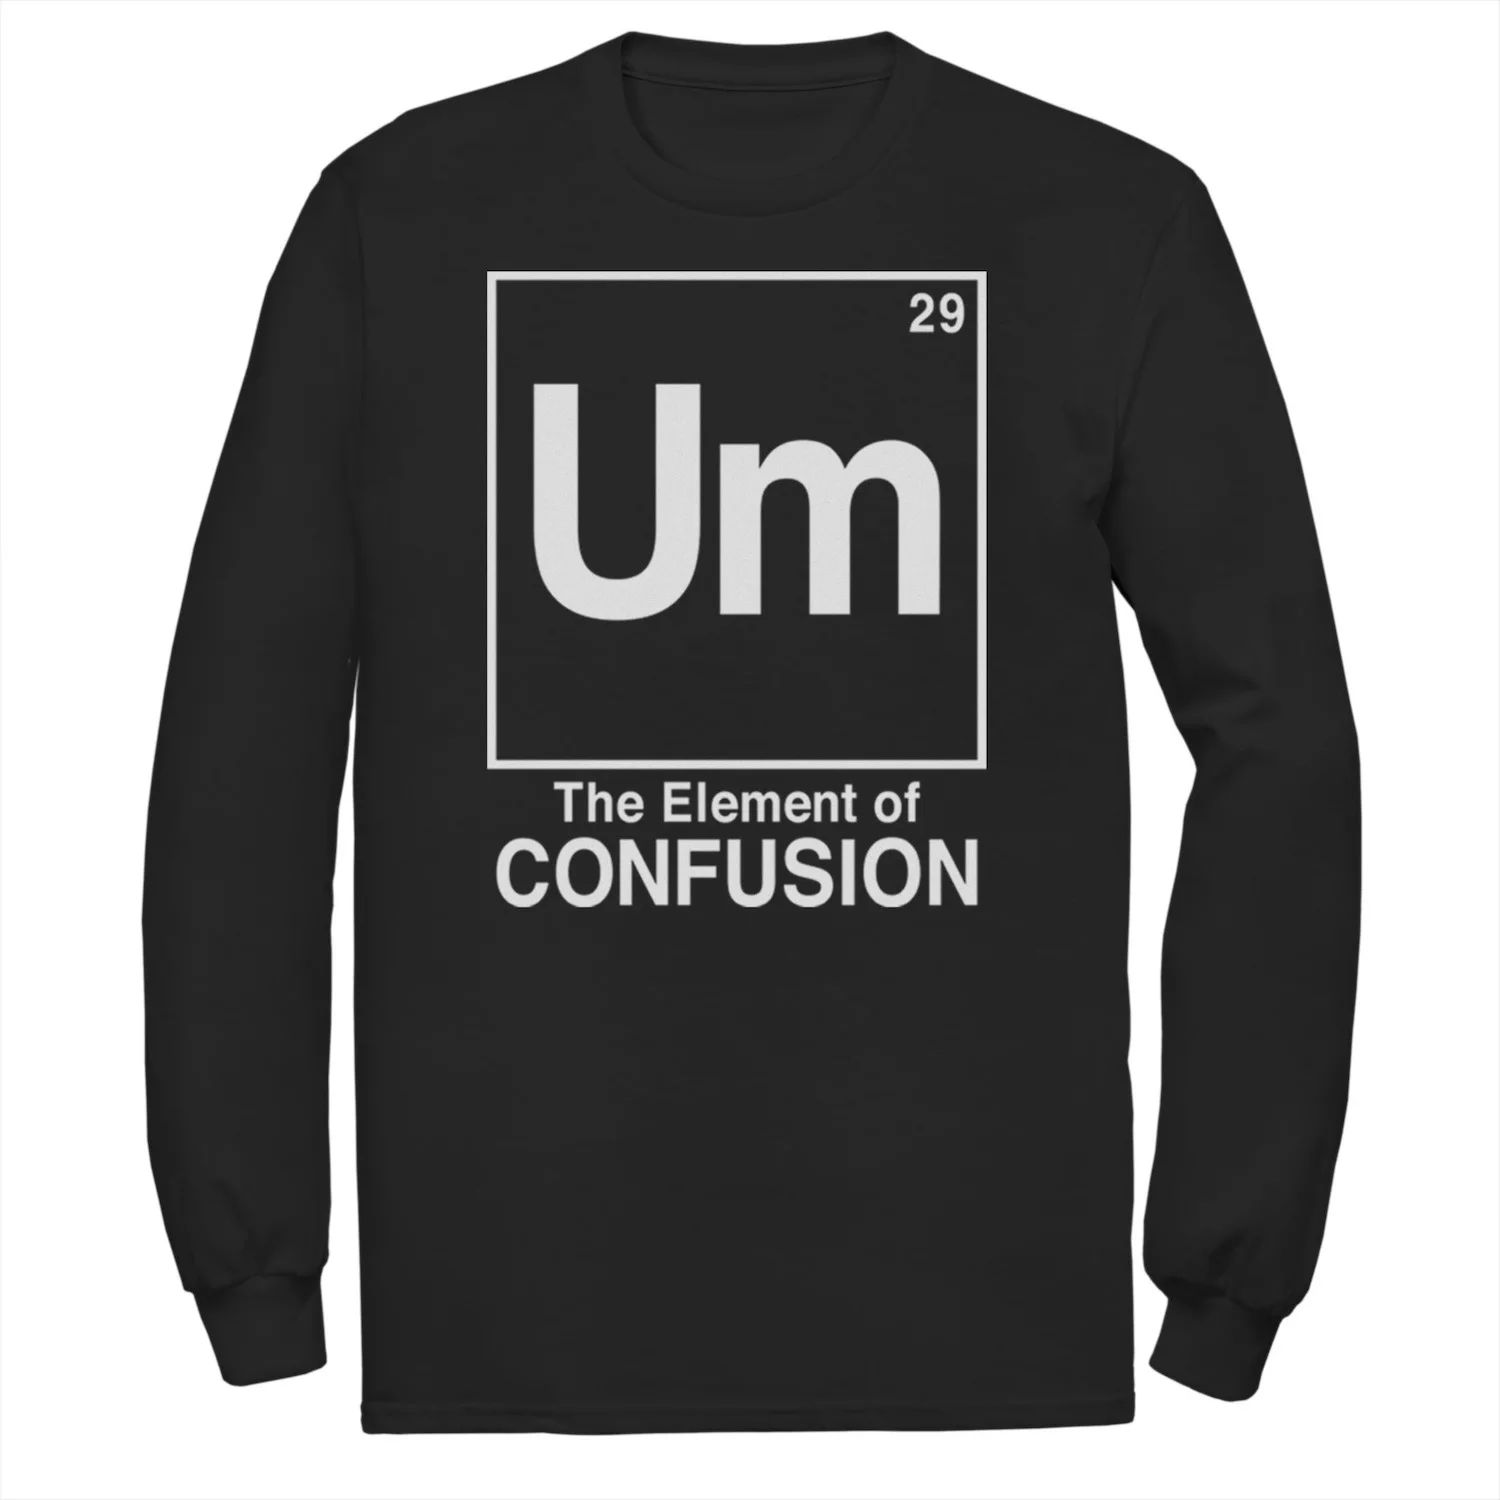 Мужская футболка UM The Element Of Confusion Licensed Character um the element of confusion sarcastic humor graphic novelty funny t shirt